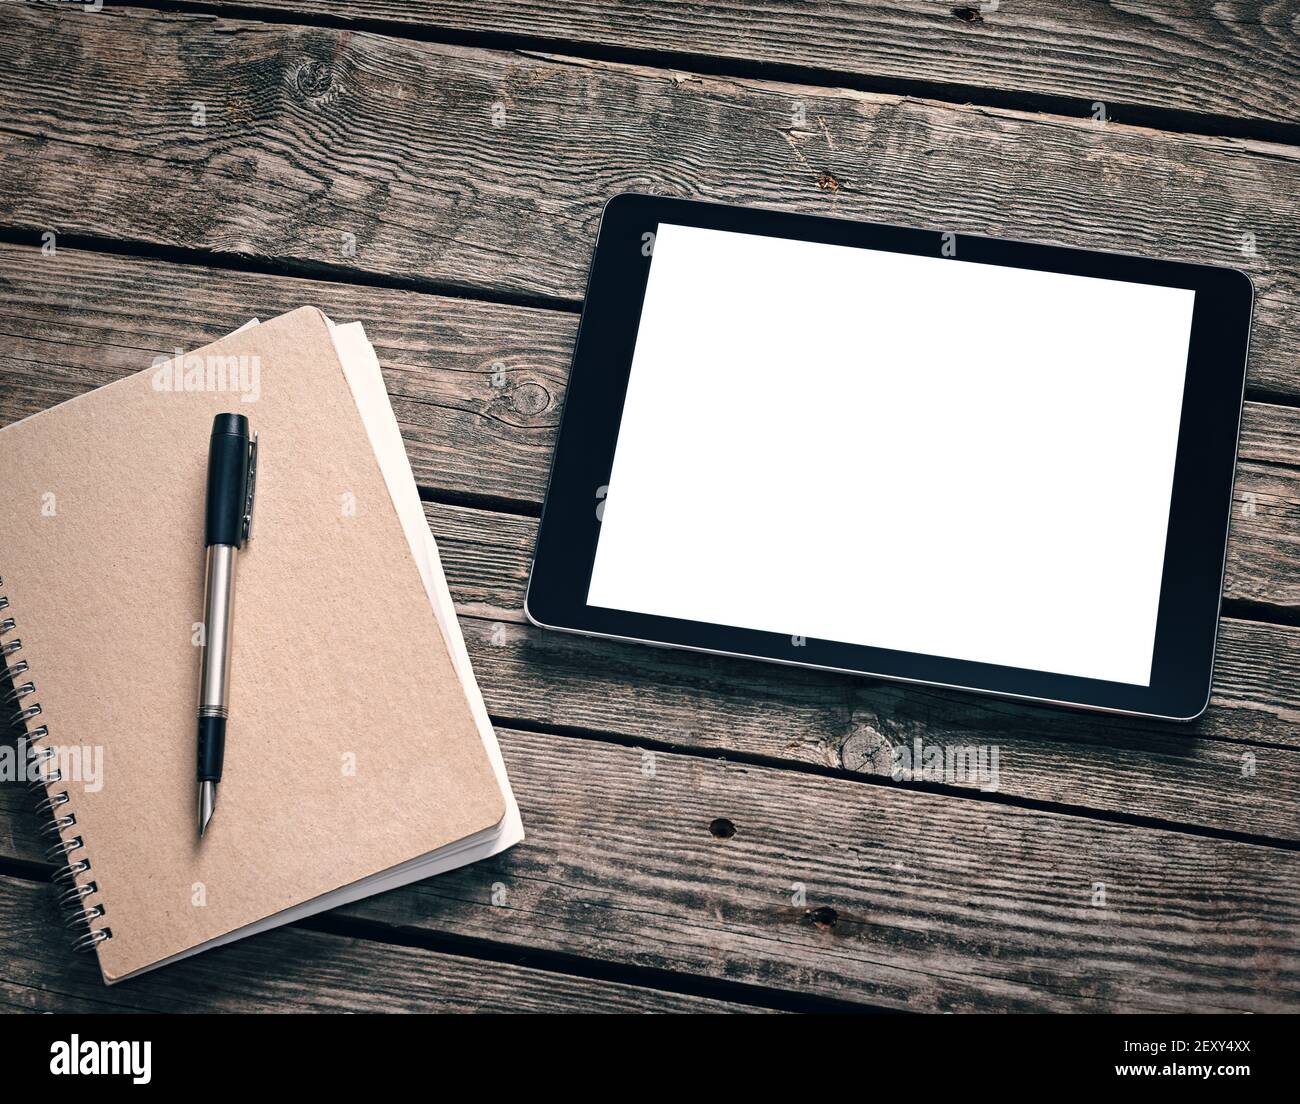 Tablet with ring binder on desktop Stock Photo